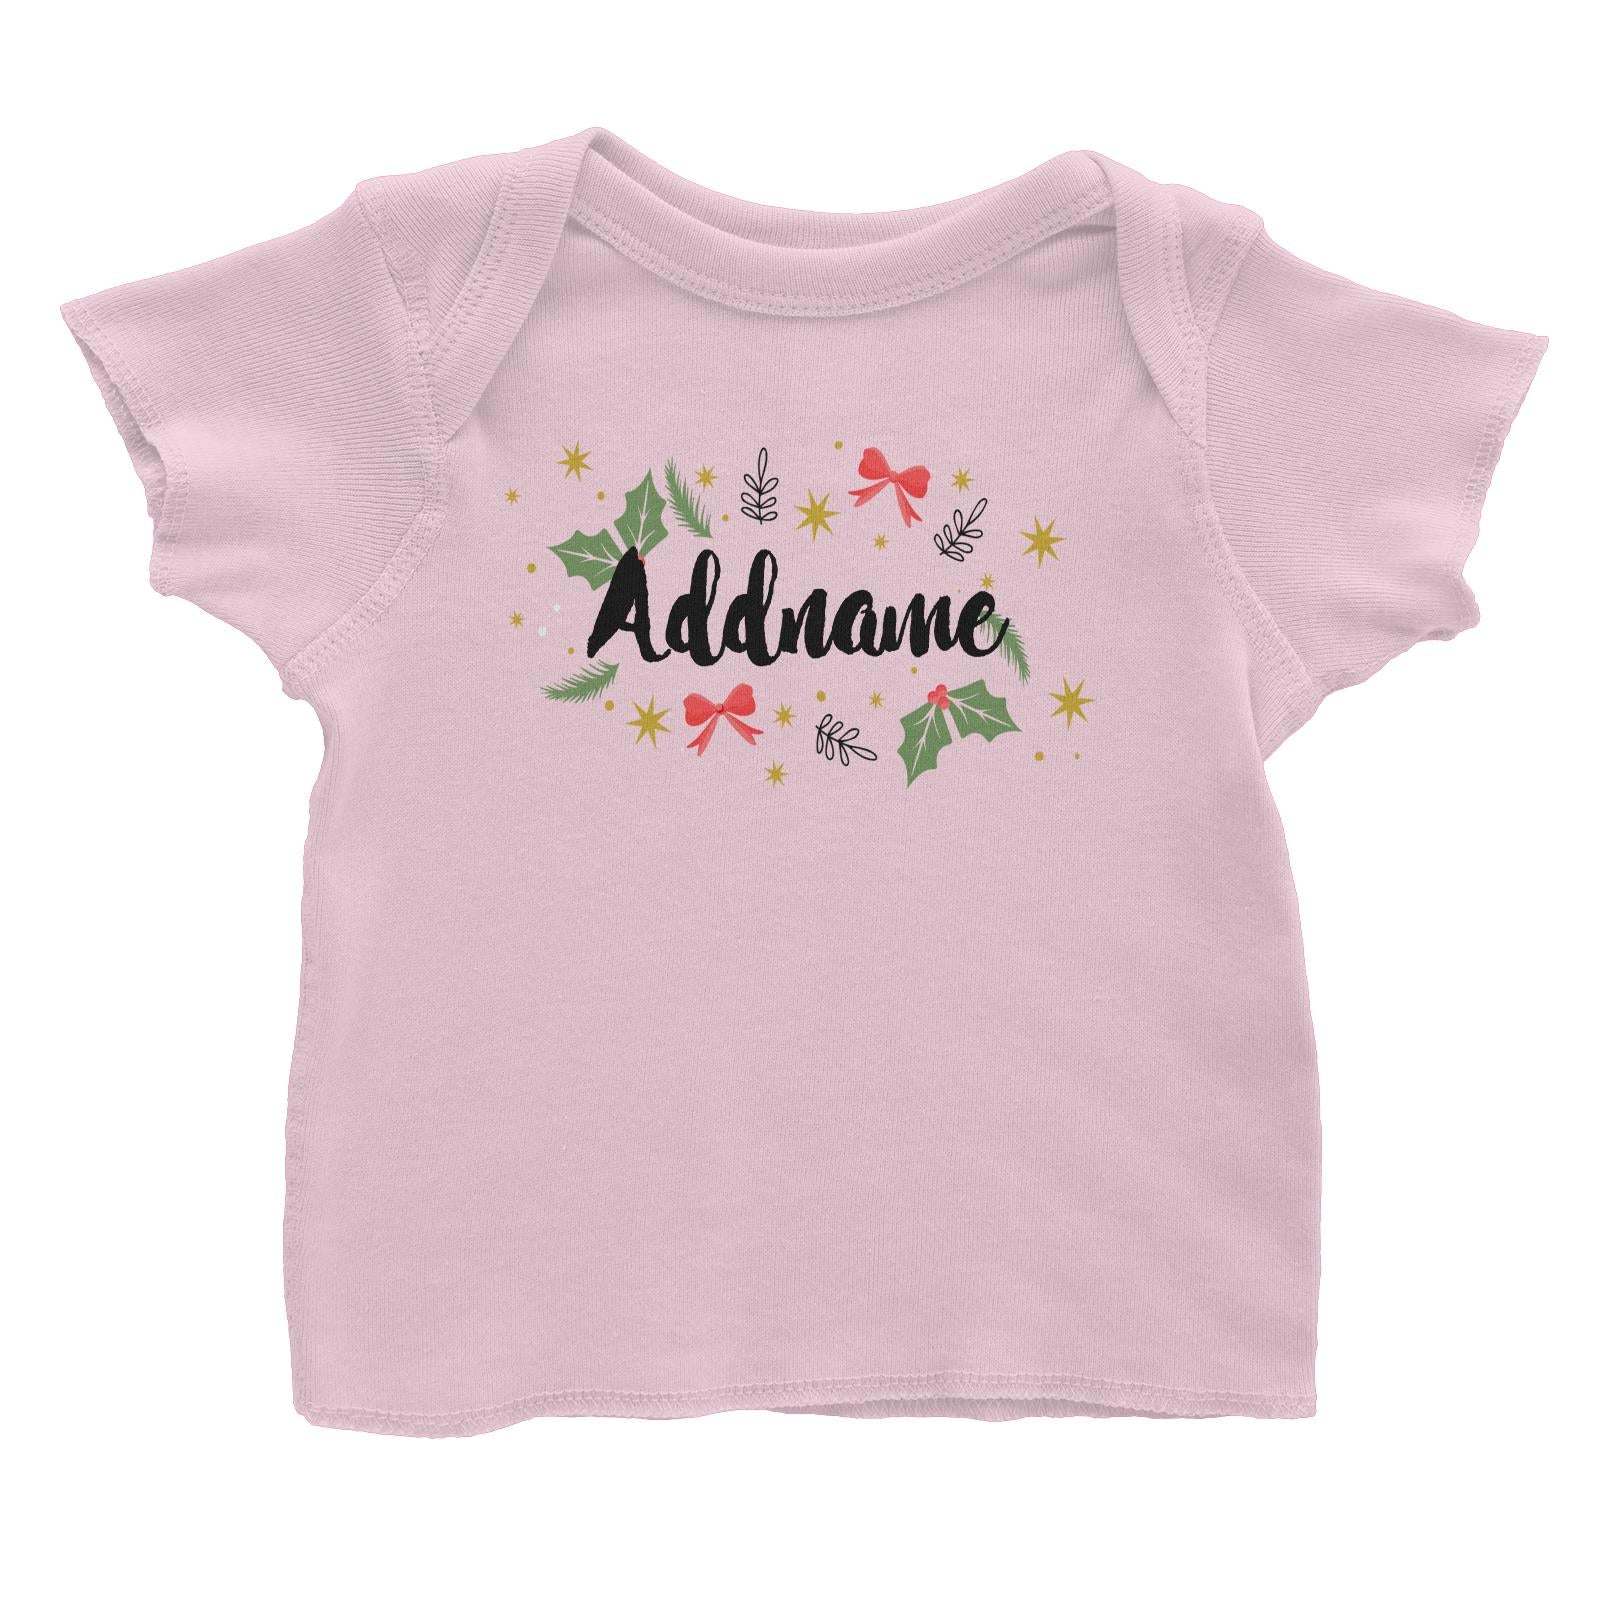 Christmas Elements Addname Baby T-Shirt  Personalizable Designs Lettering Matching Family